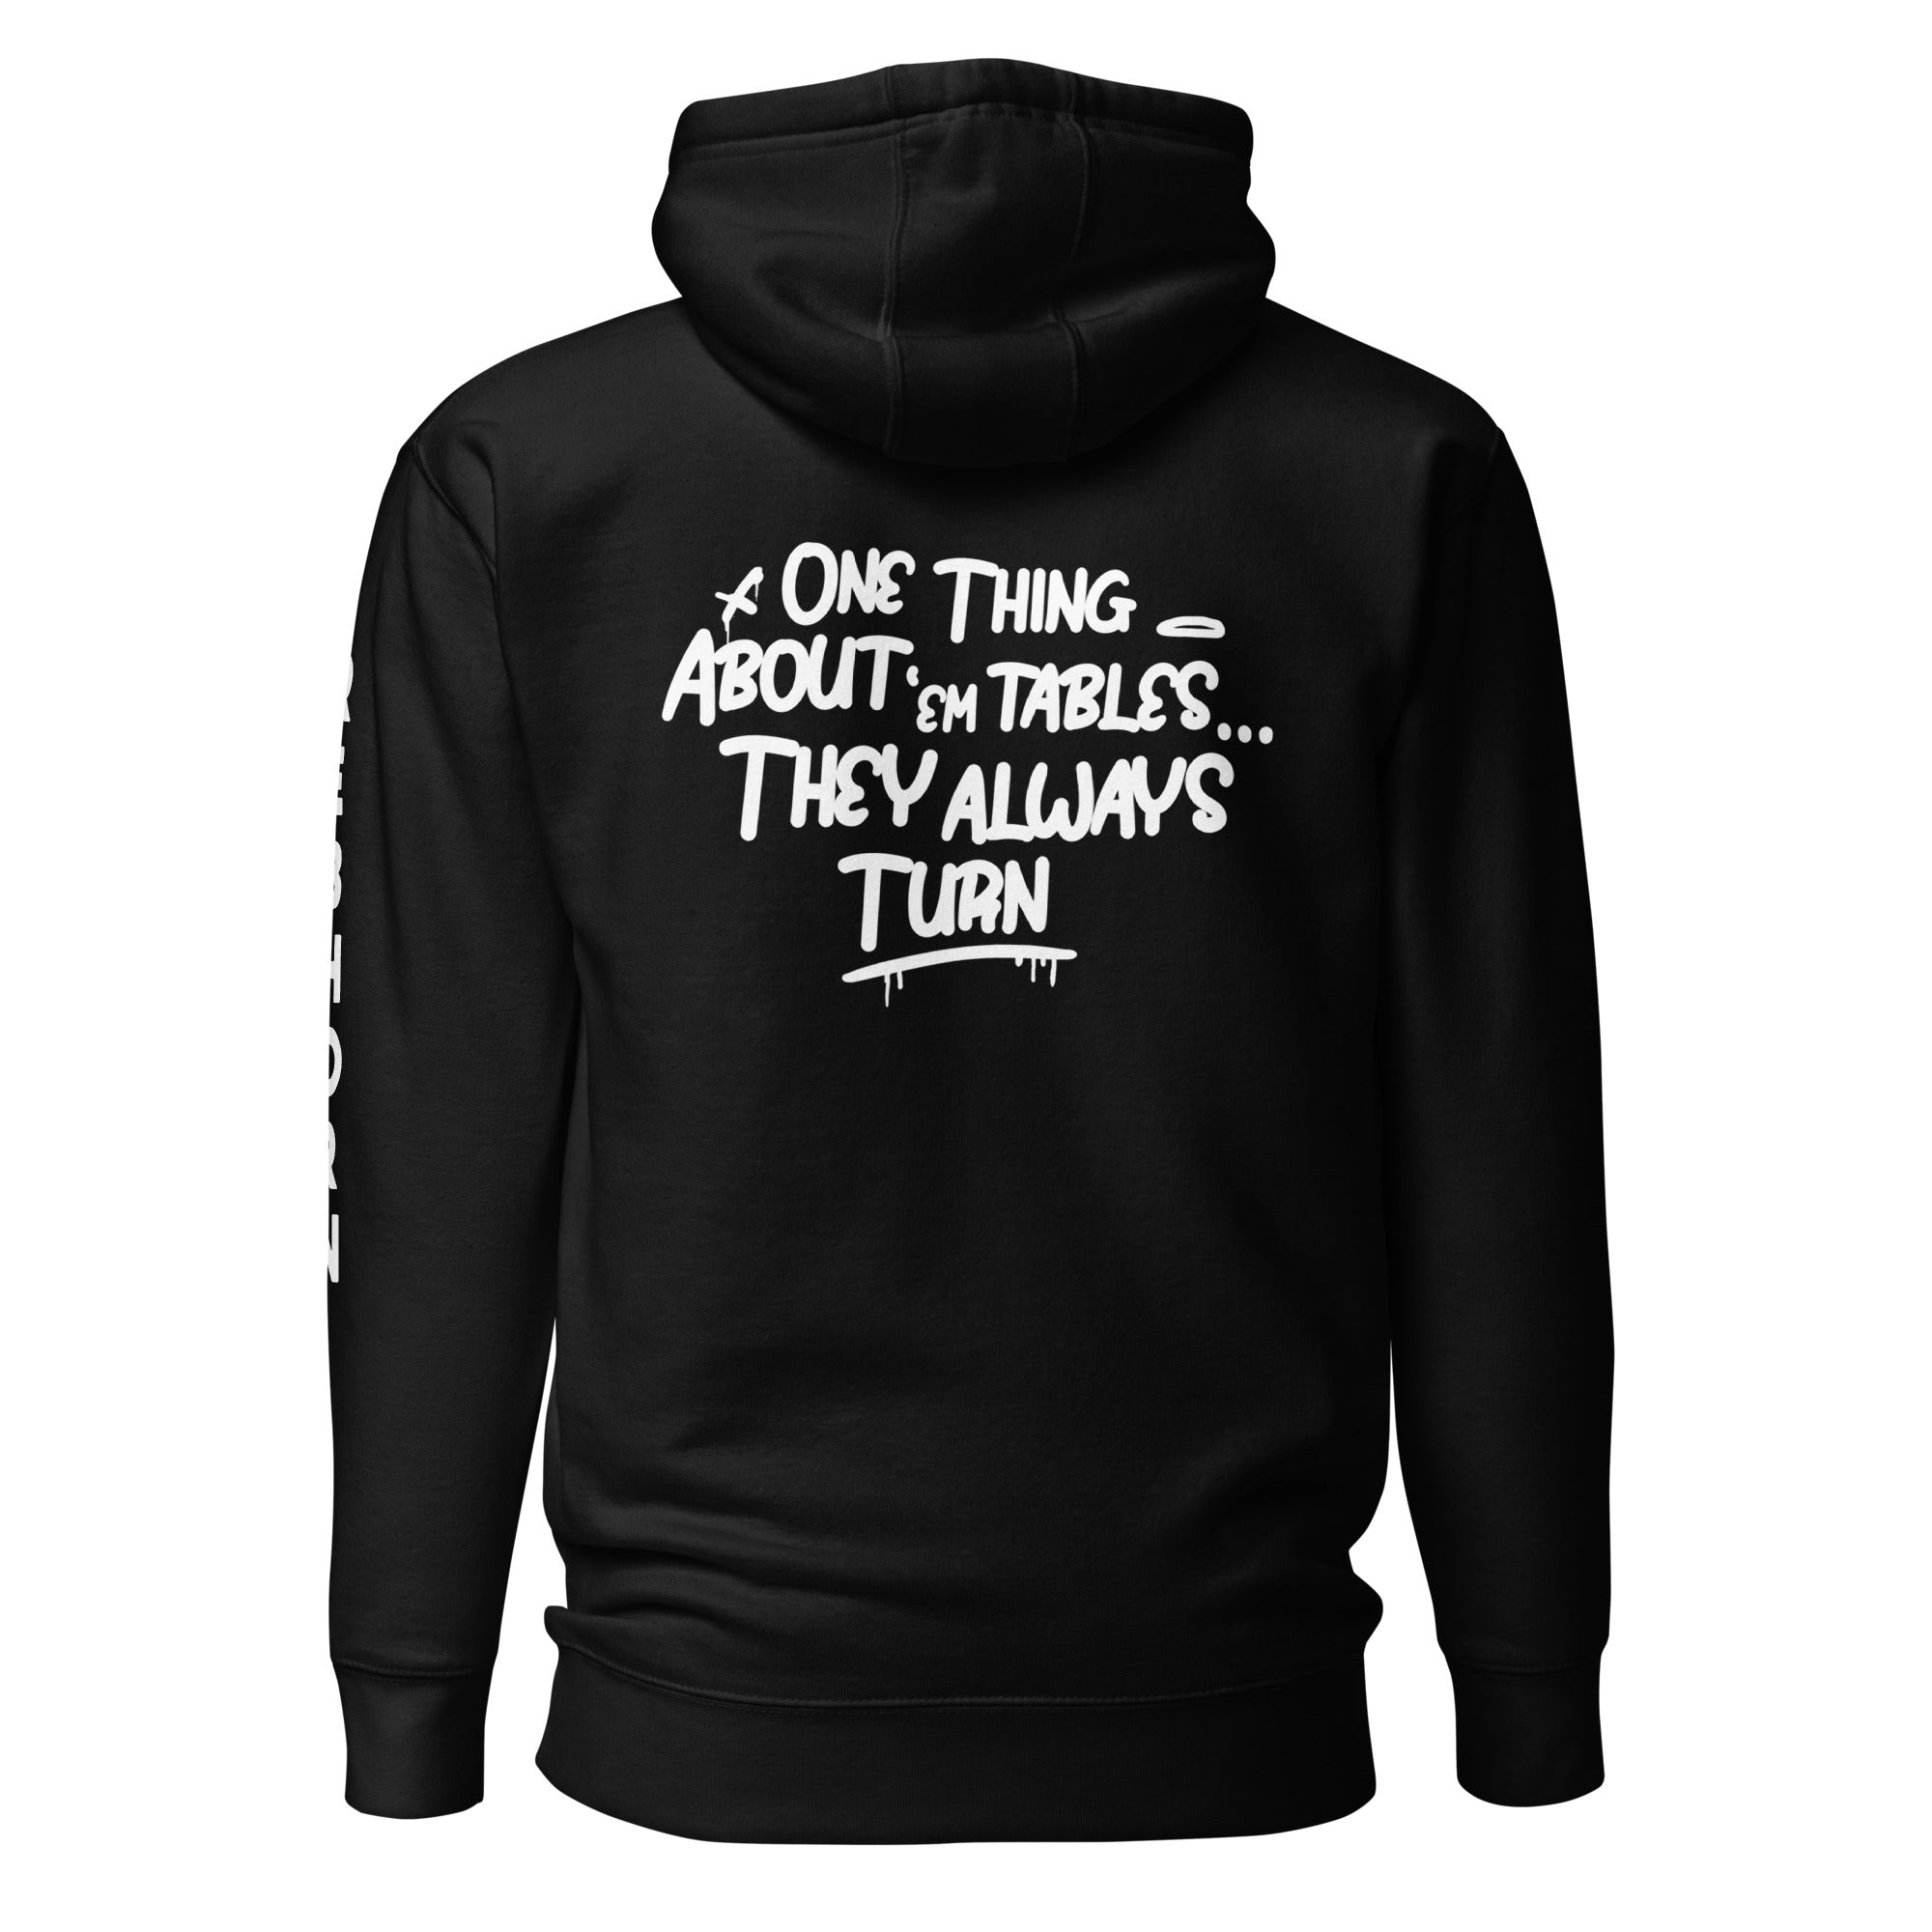 One Thing About Them Tables Premium Unisex Hoodie - REBHORN DESIGN